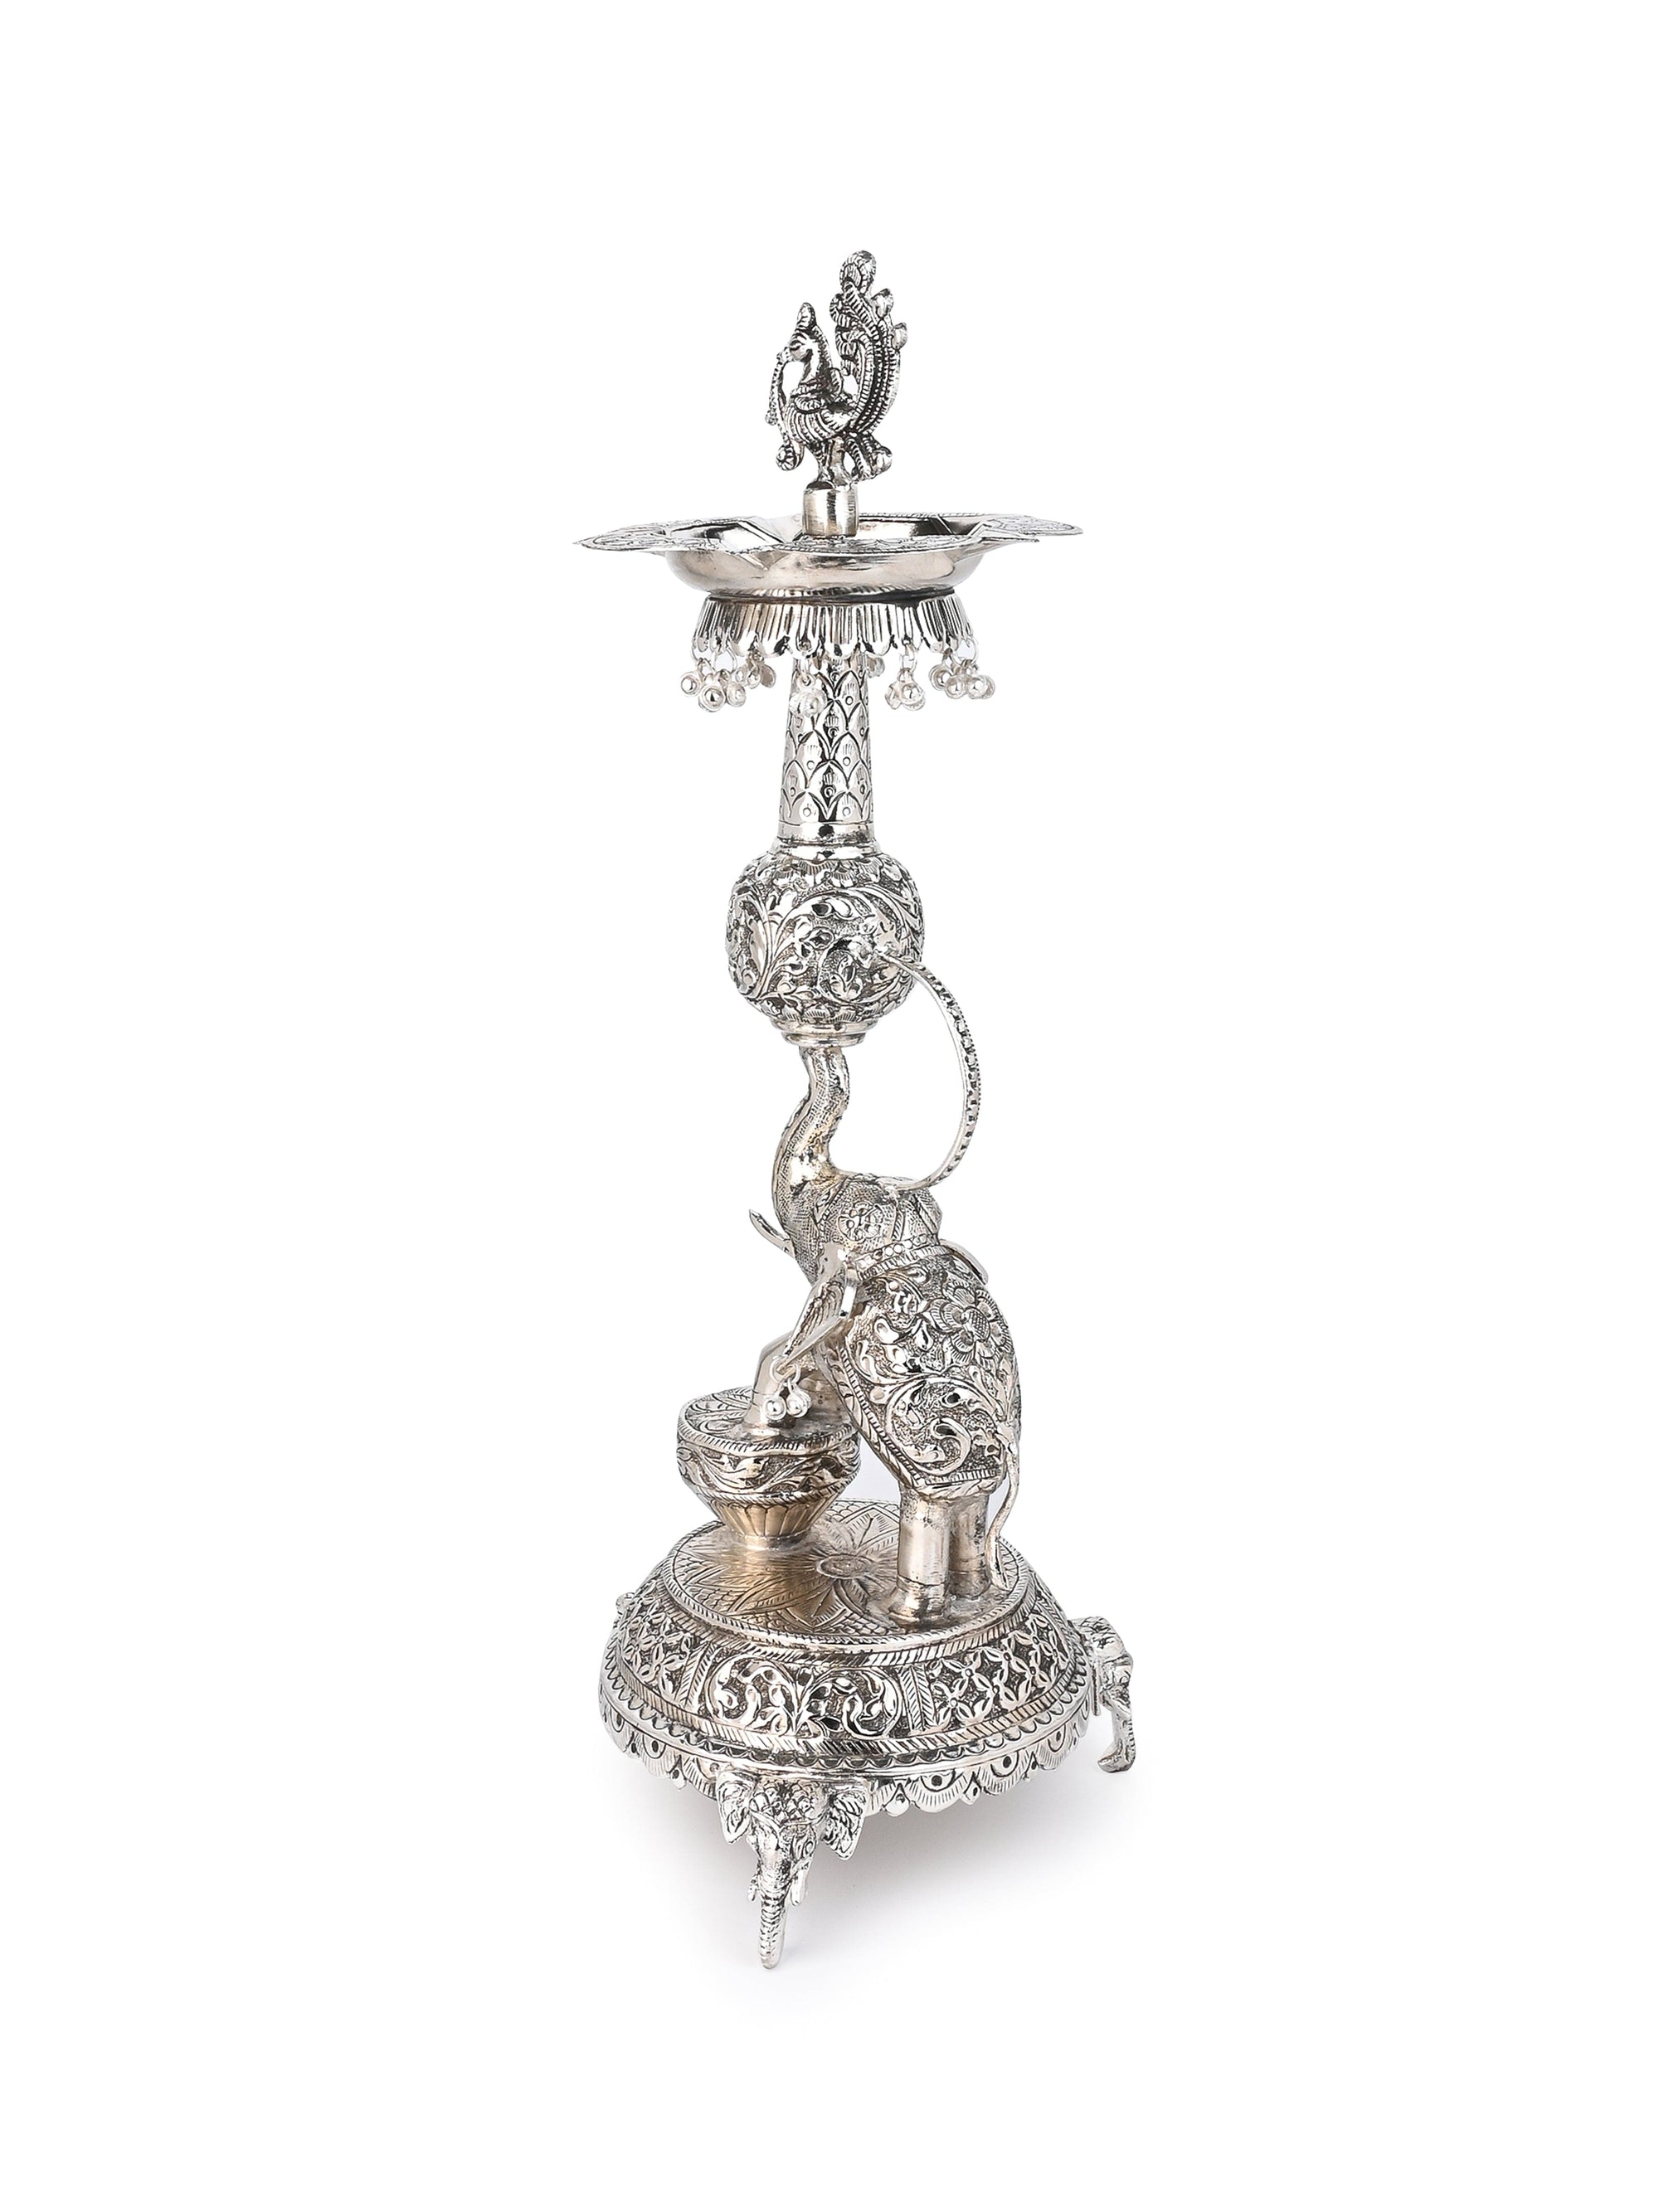 Antique Finish Oxidized Silver Traditional Lamp / Samai for Puja Rituals - 18 inches